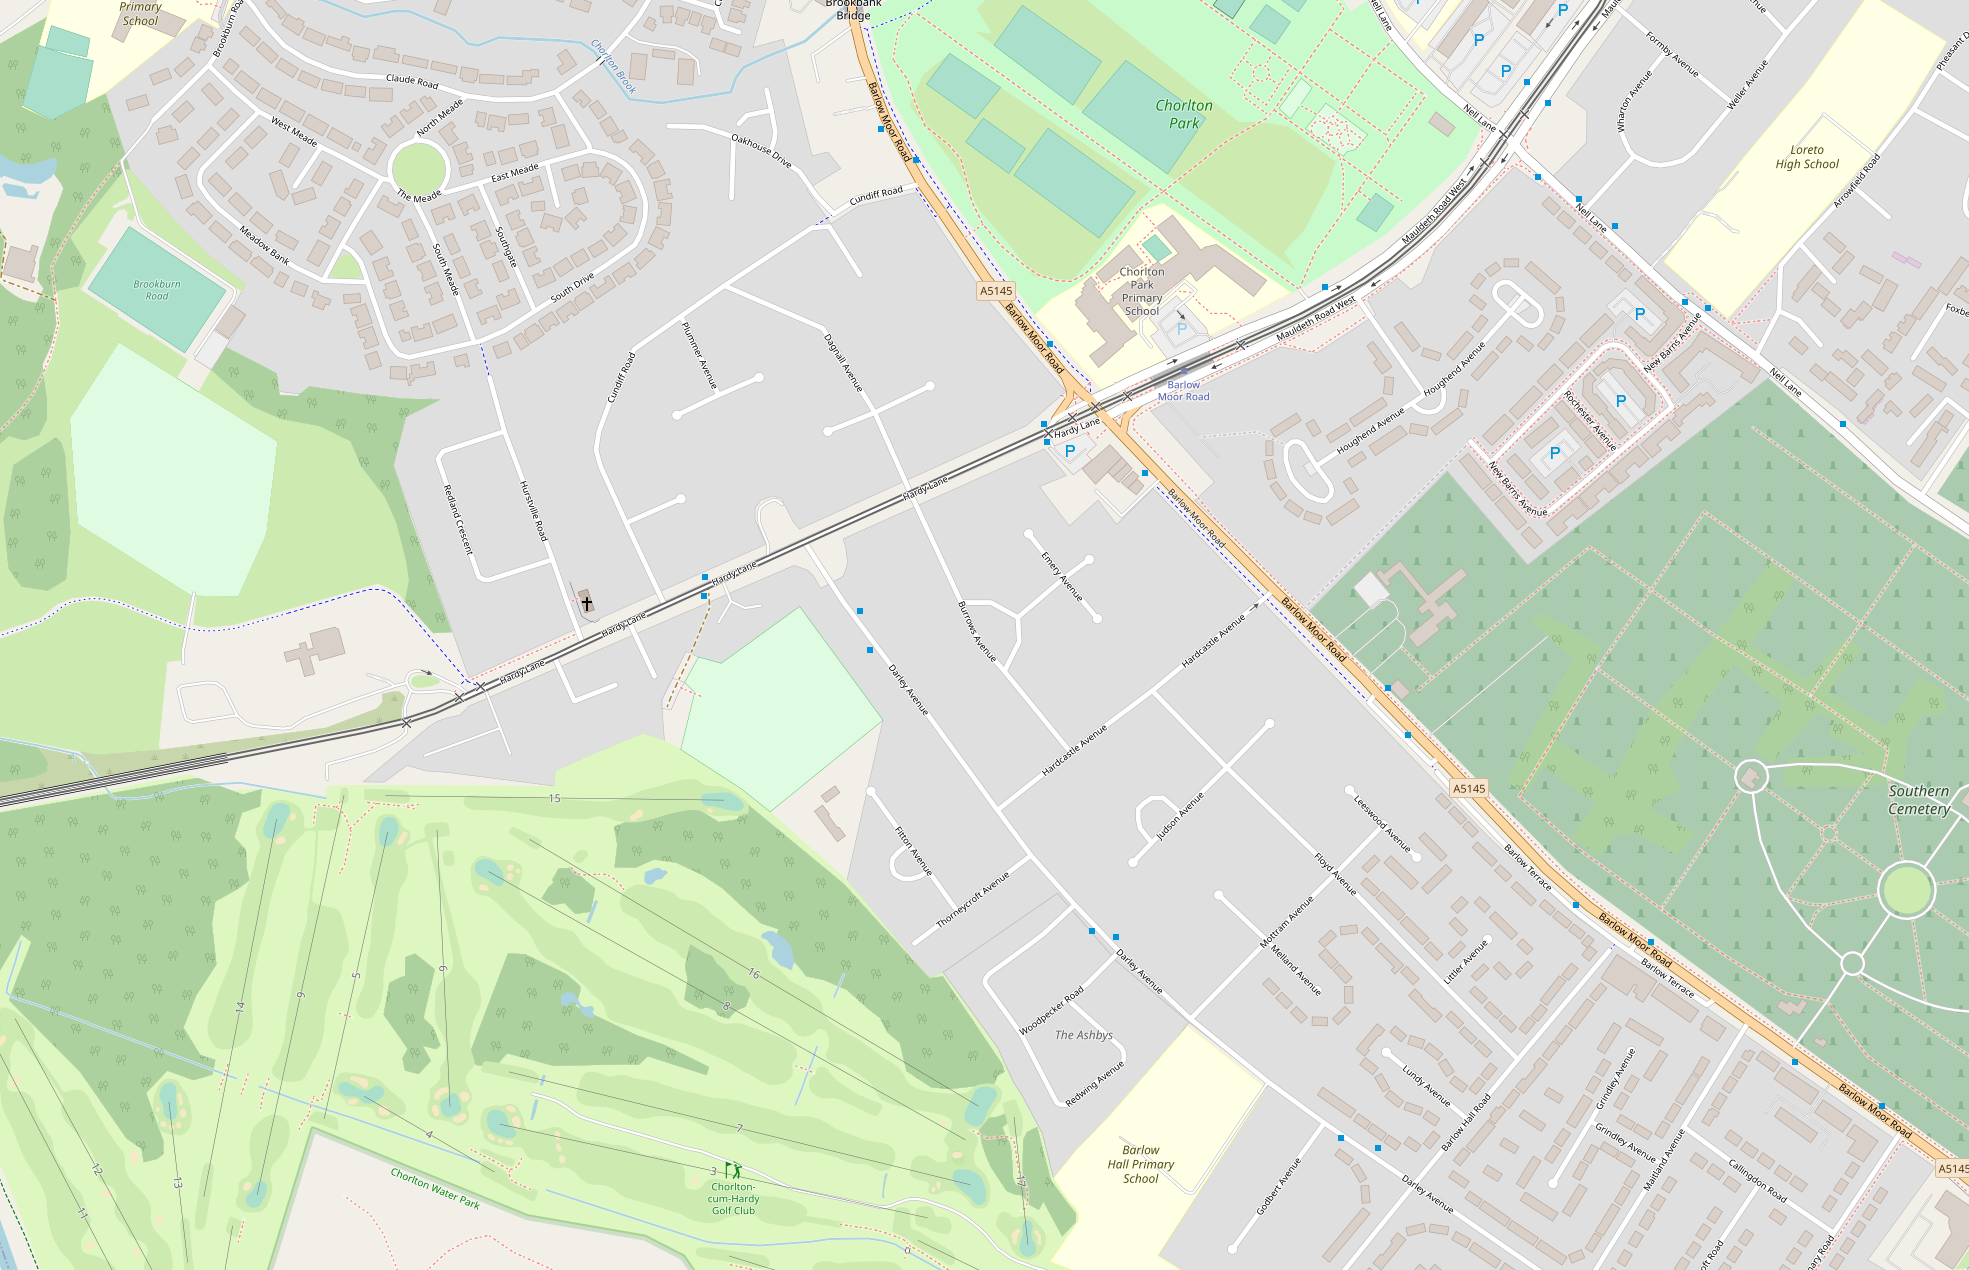 This is a map of Burrows Avenue in Chorlton